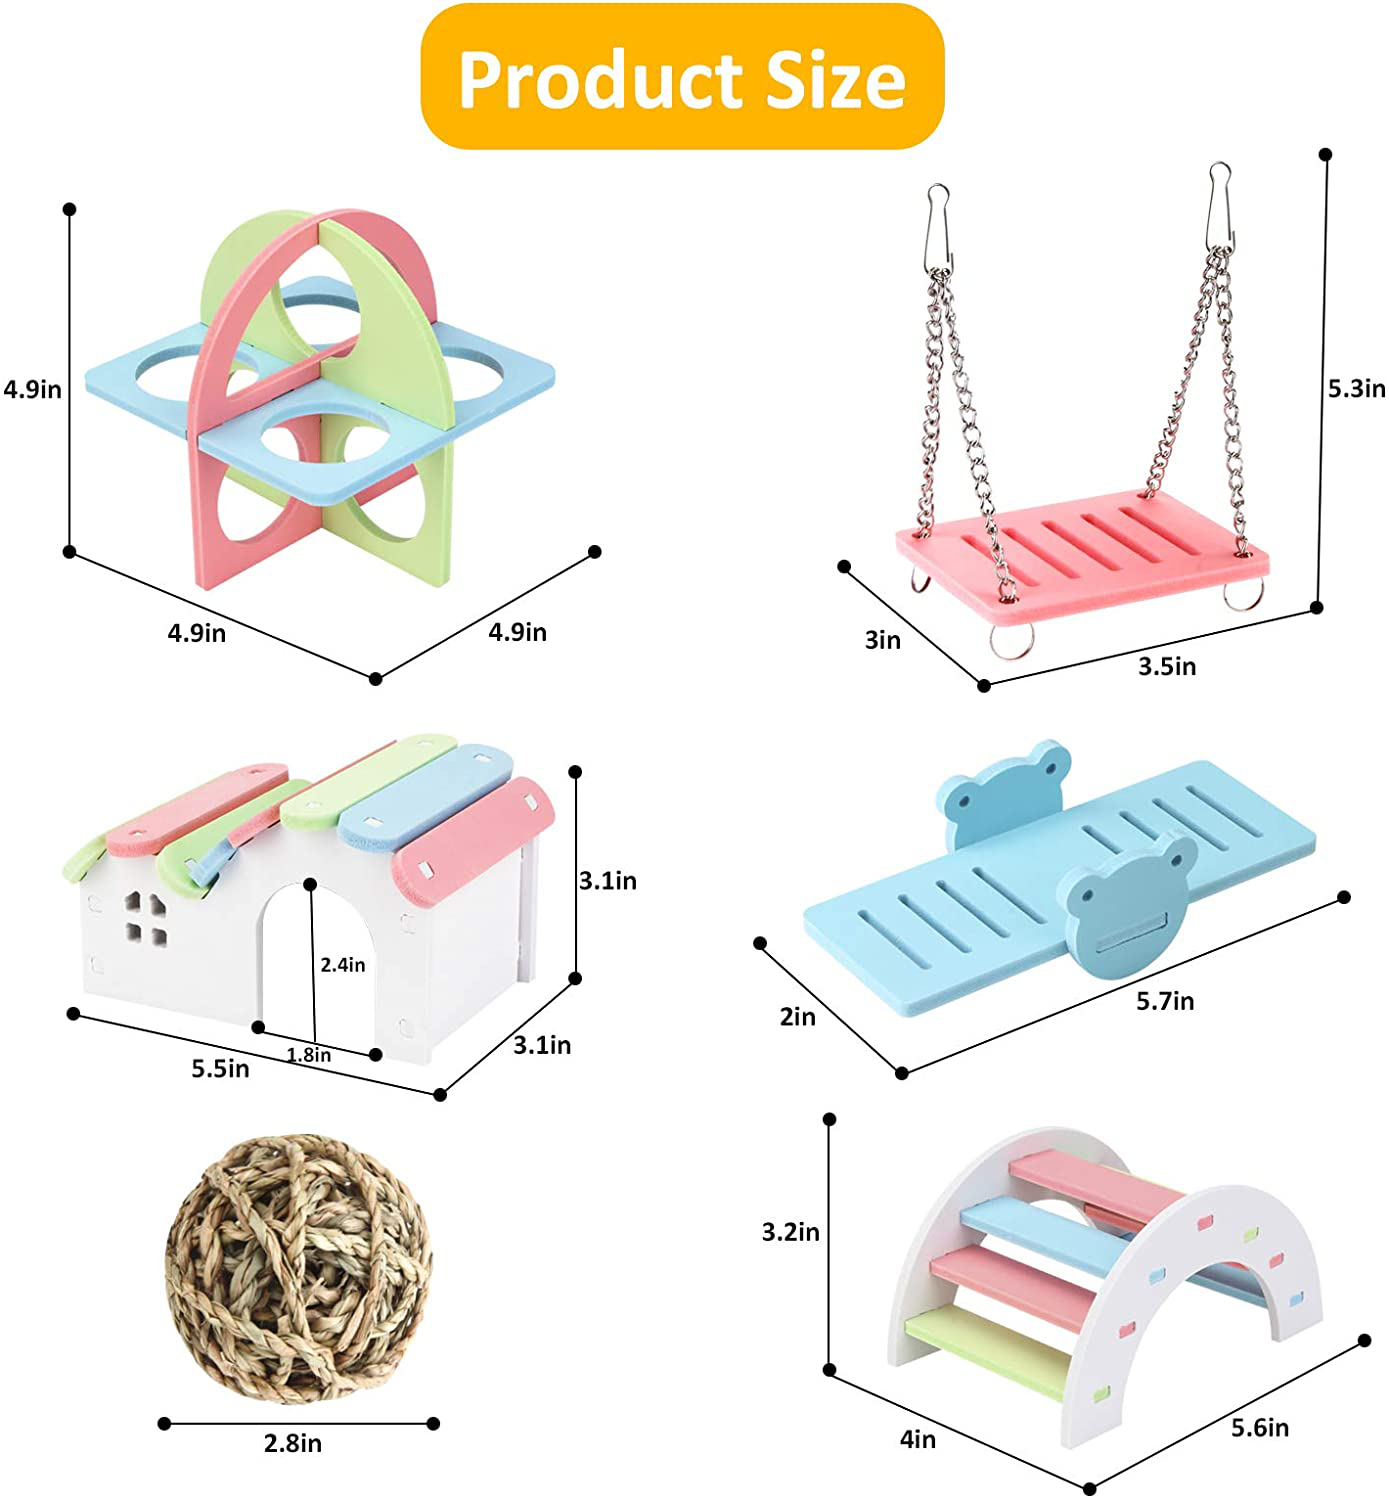 Lenpestia 6 Pieces Pet Sports Toys Set, Dwarf Hamsters House, Gerbil Hideout Rainbow Bridge, Seagrass Ball, Swing and Seesaw Syrian Hamster DIY Cage Accessories for Small Animal Habitat Animals & Pet Supplies > Pet Supplies > Small Animal Supplies > Small Animal Habitat Accessories lenpestia   